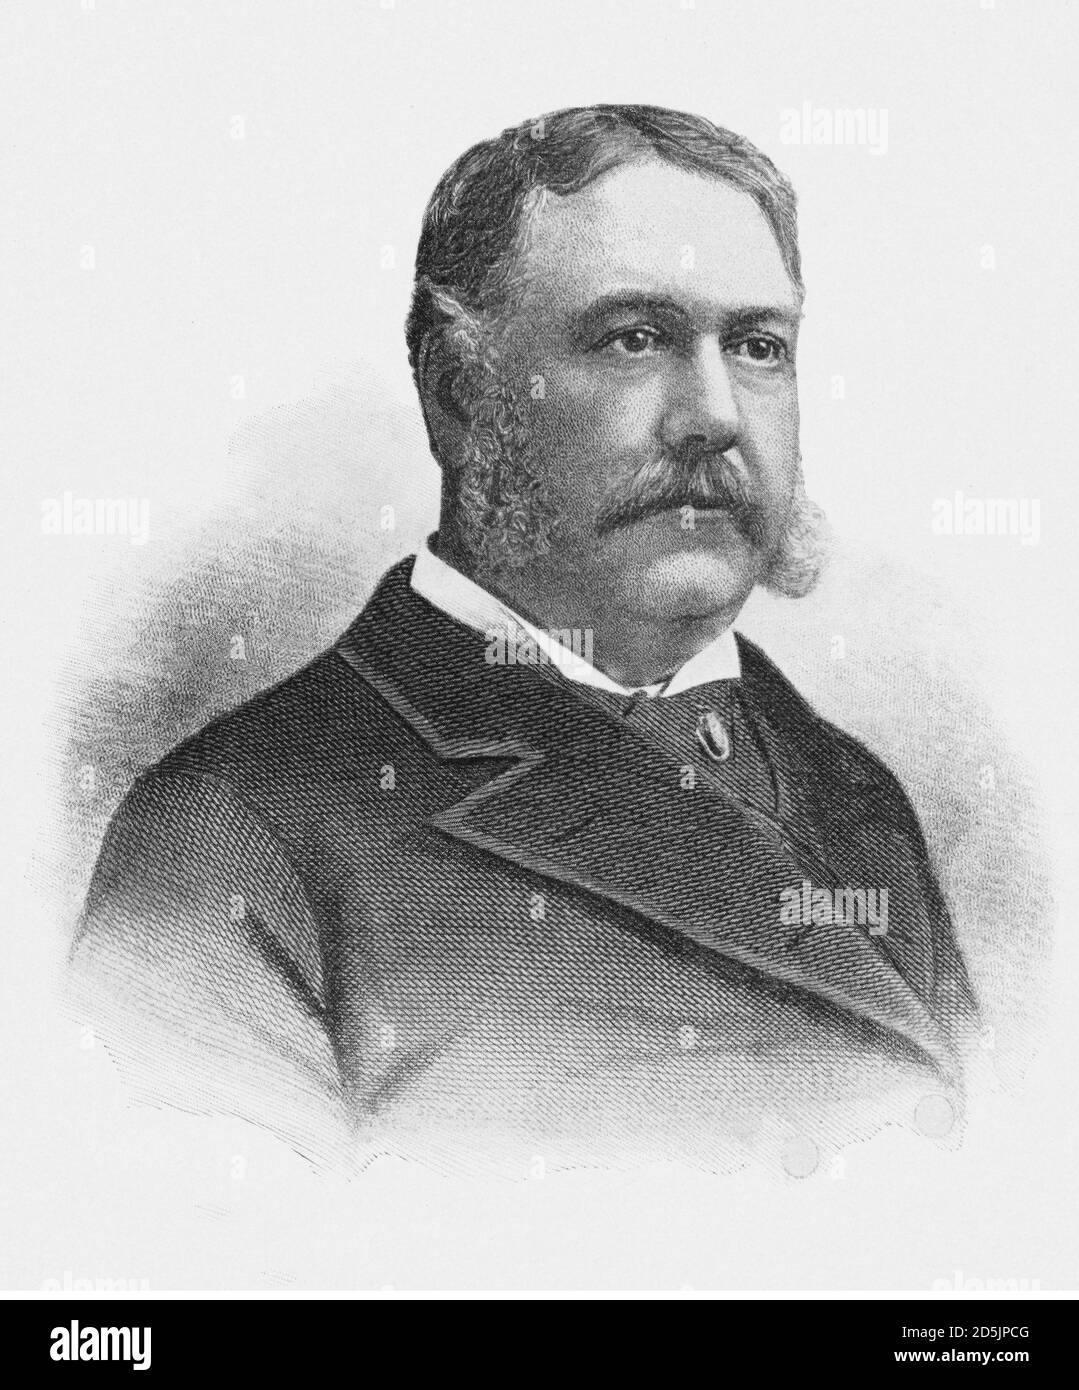 Portrait of president Chester Alan Arthur. Chester Alan Arthur (1829 – 1886) was an American attorney and politician who served as the 21st president Stock Photo